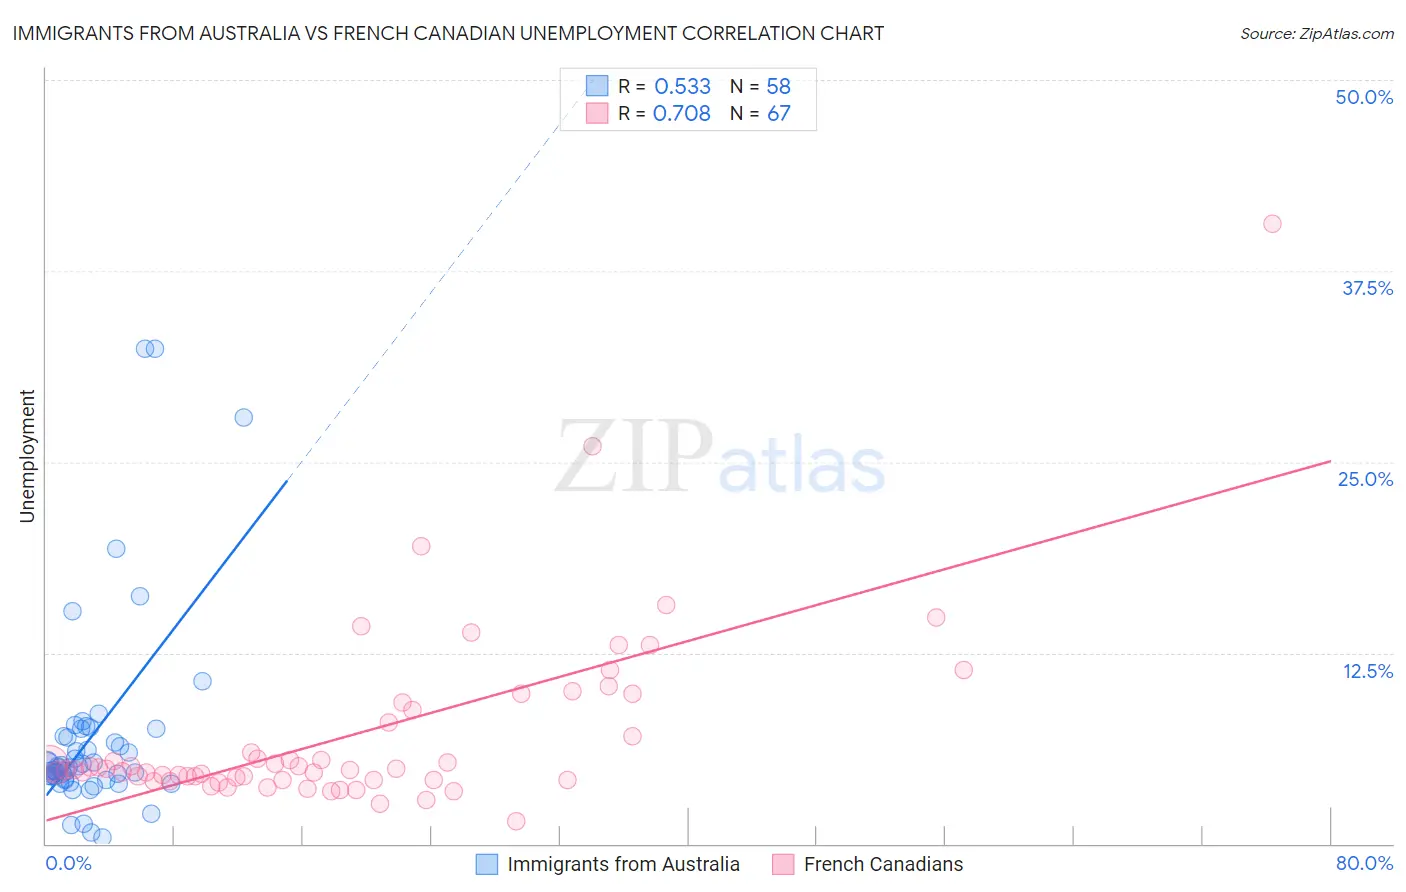 Immigrants from Australia vs French Canadian Unemployment